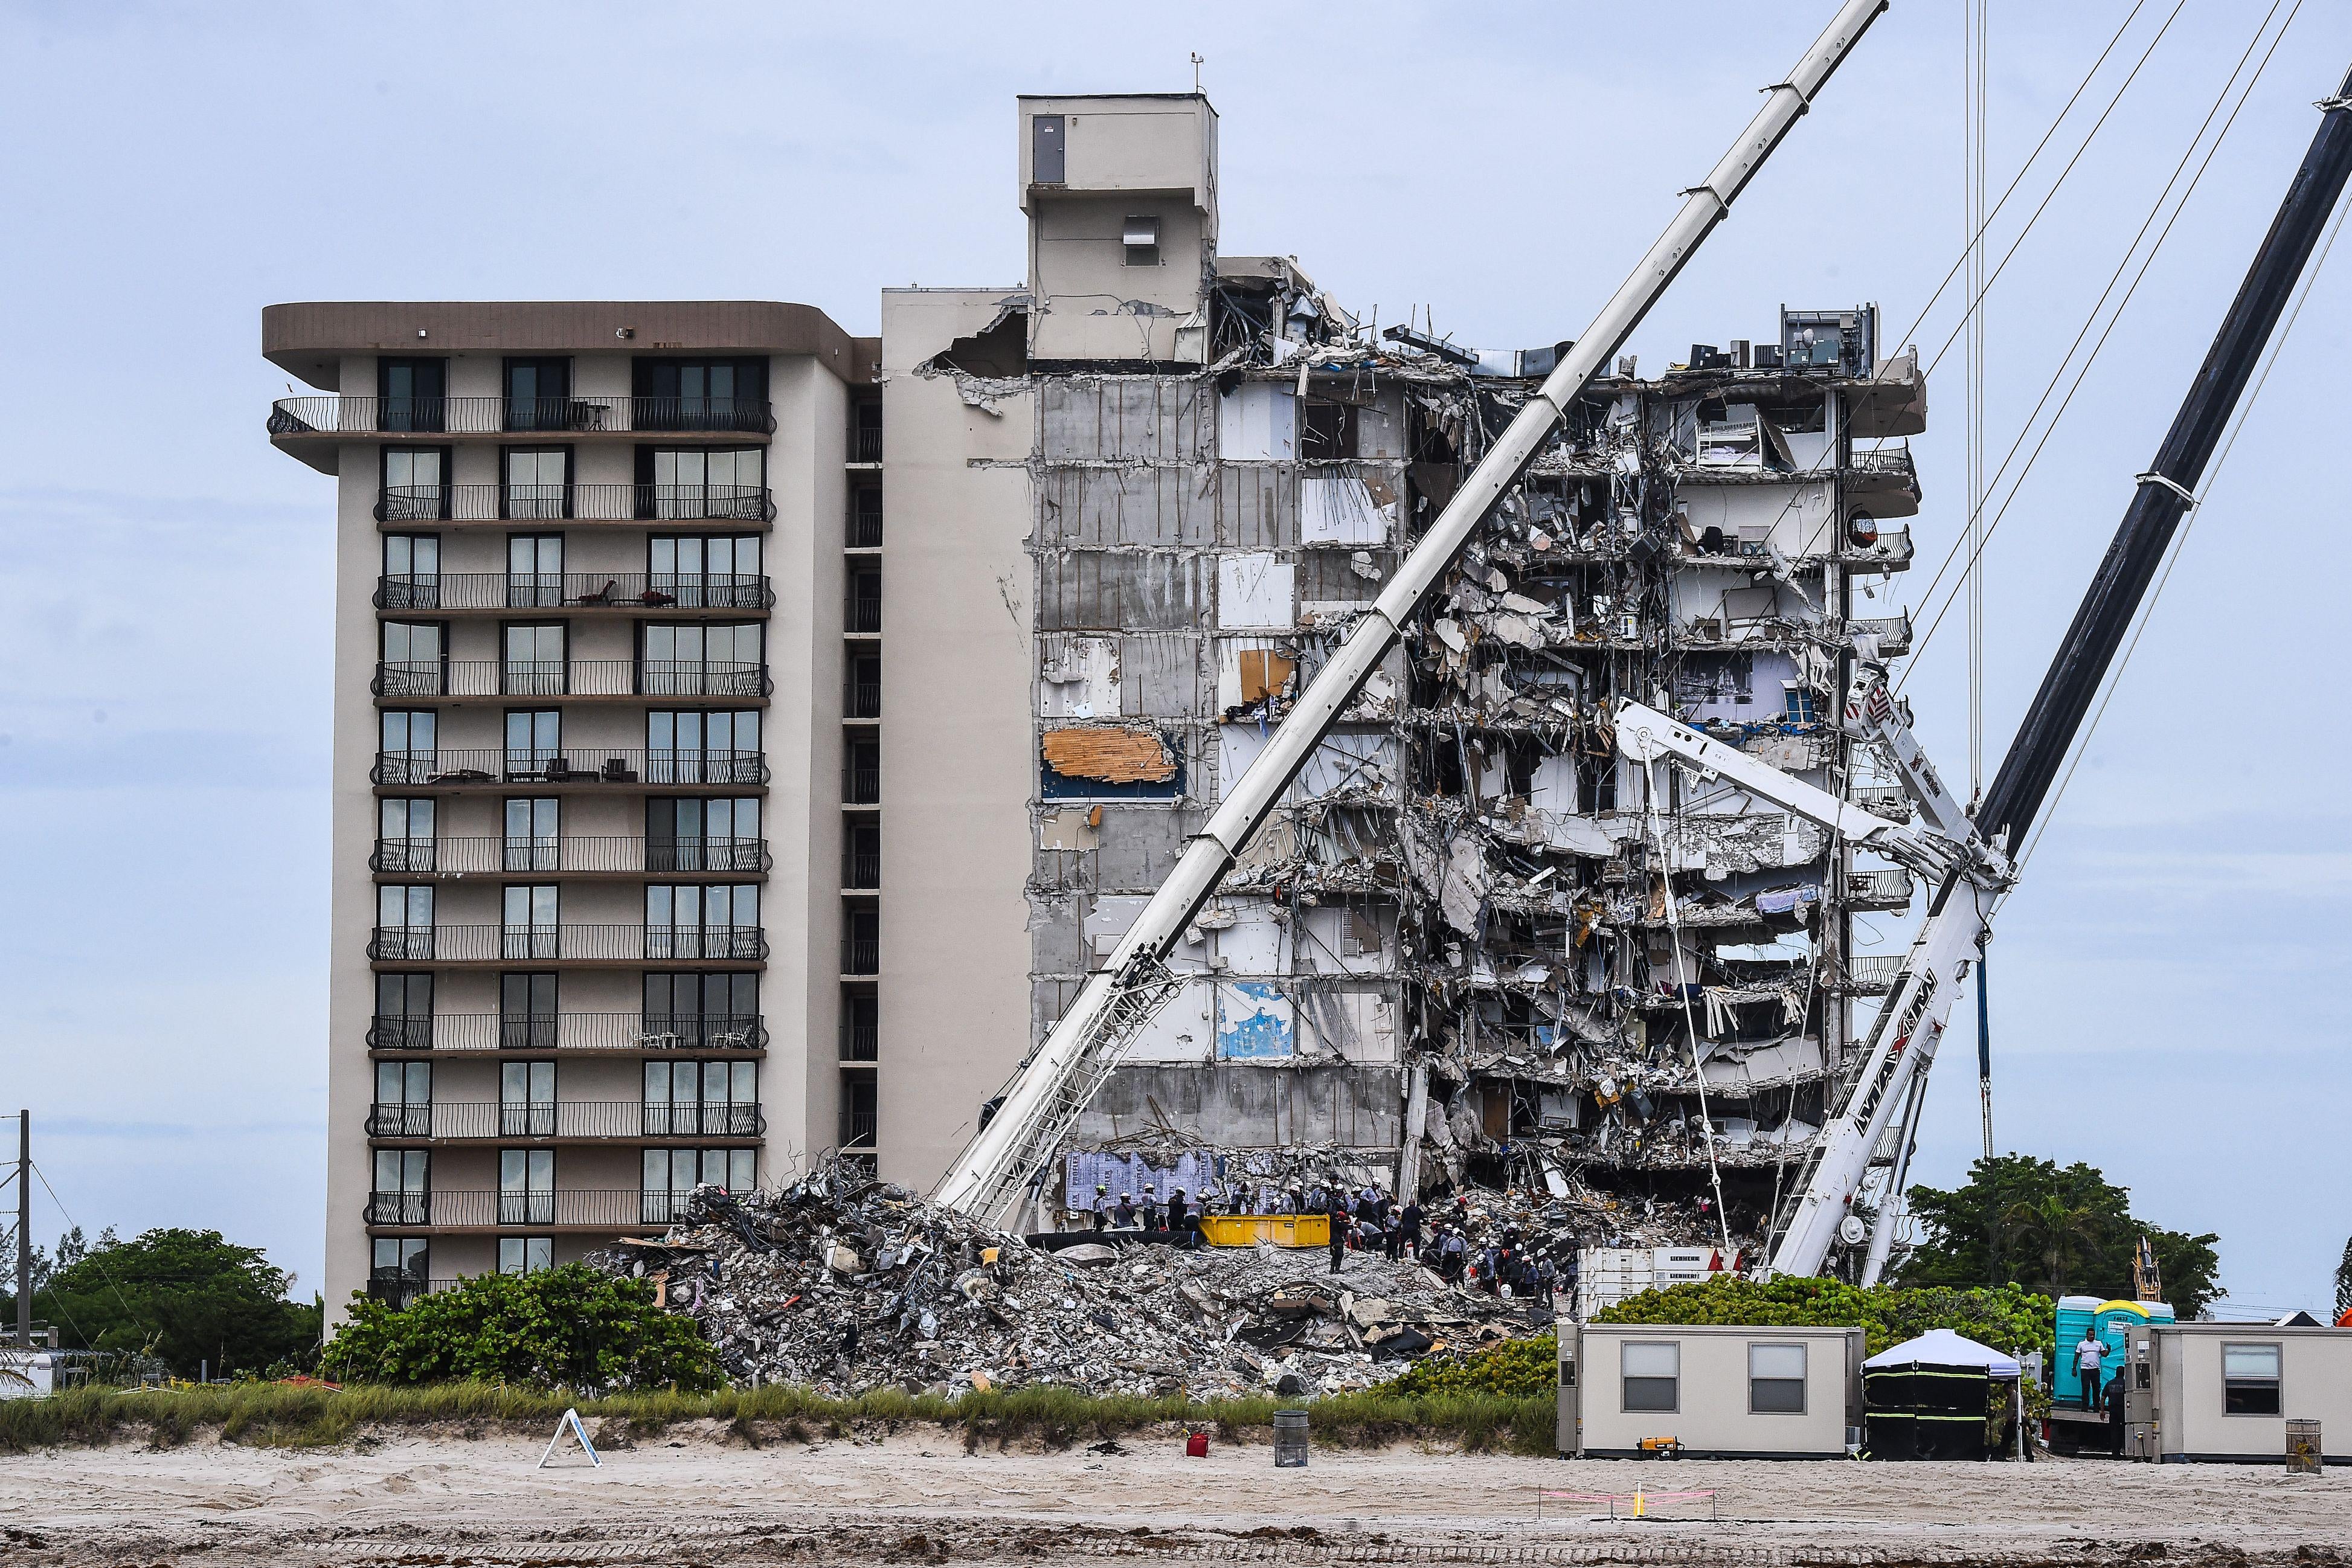 A partially collapsed building on a beach.